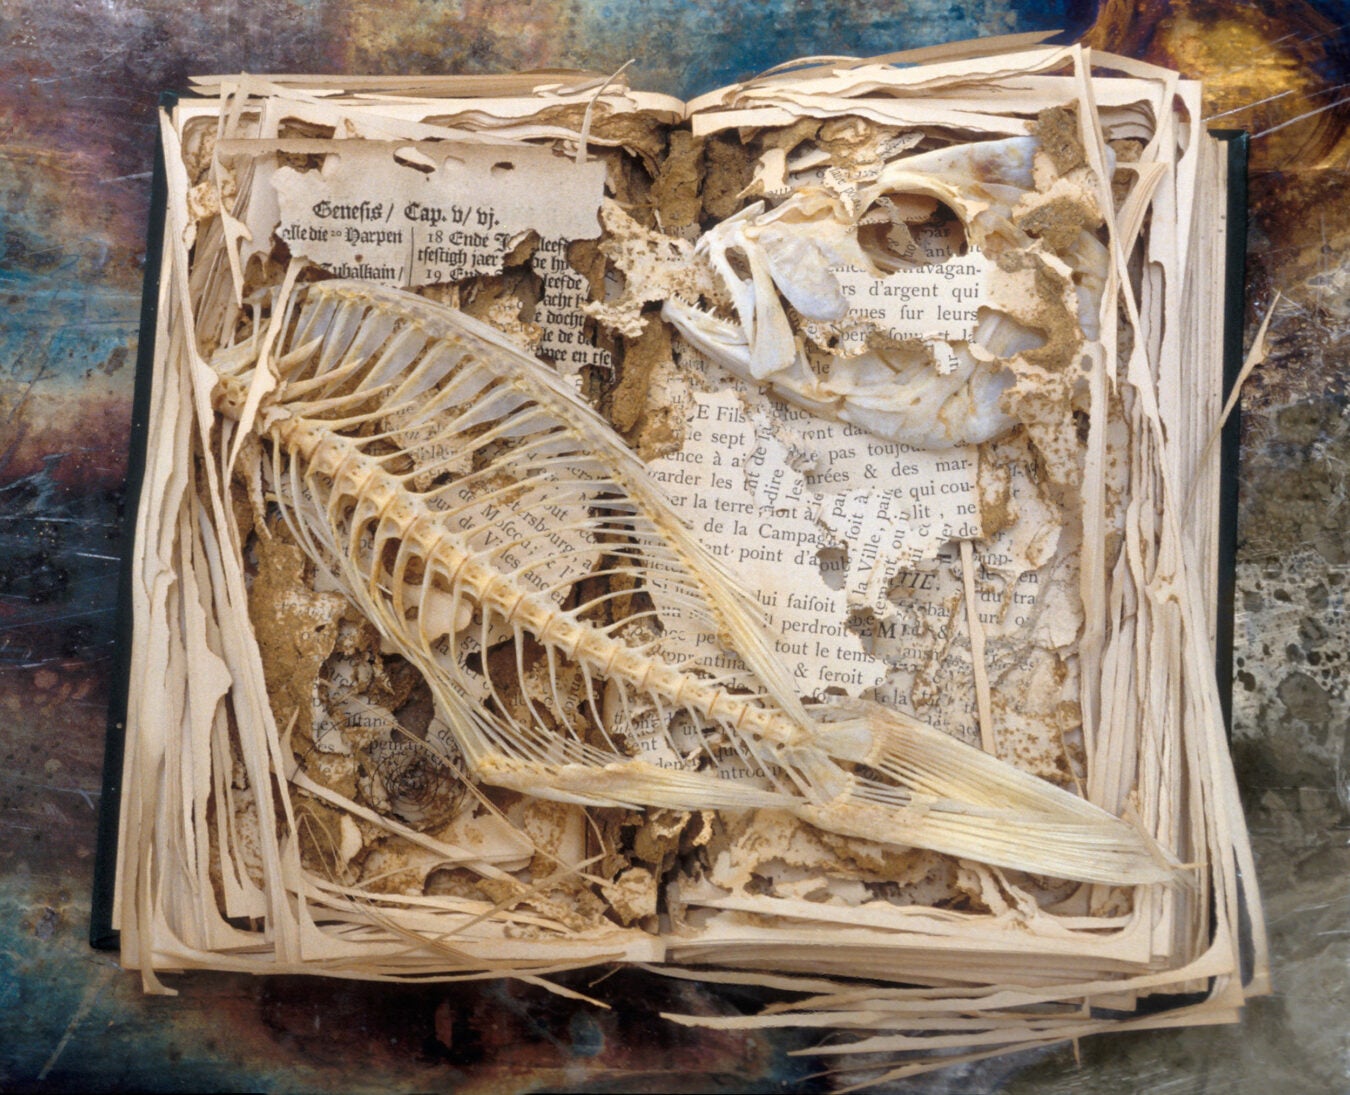 Fish bones placed on top of termite-damaged book.